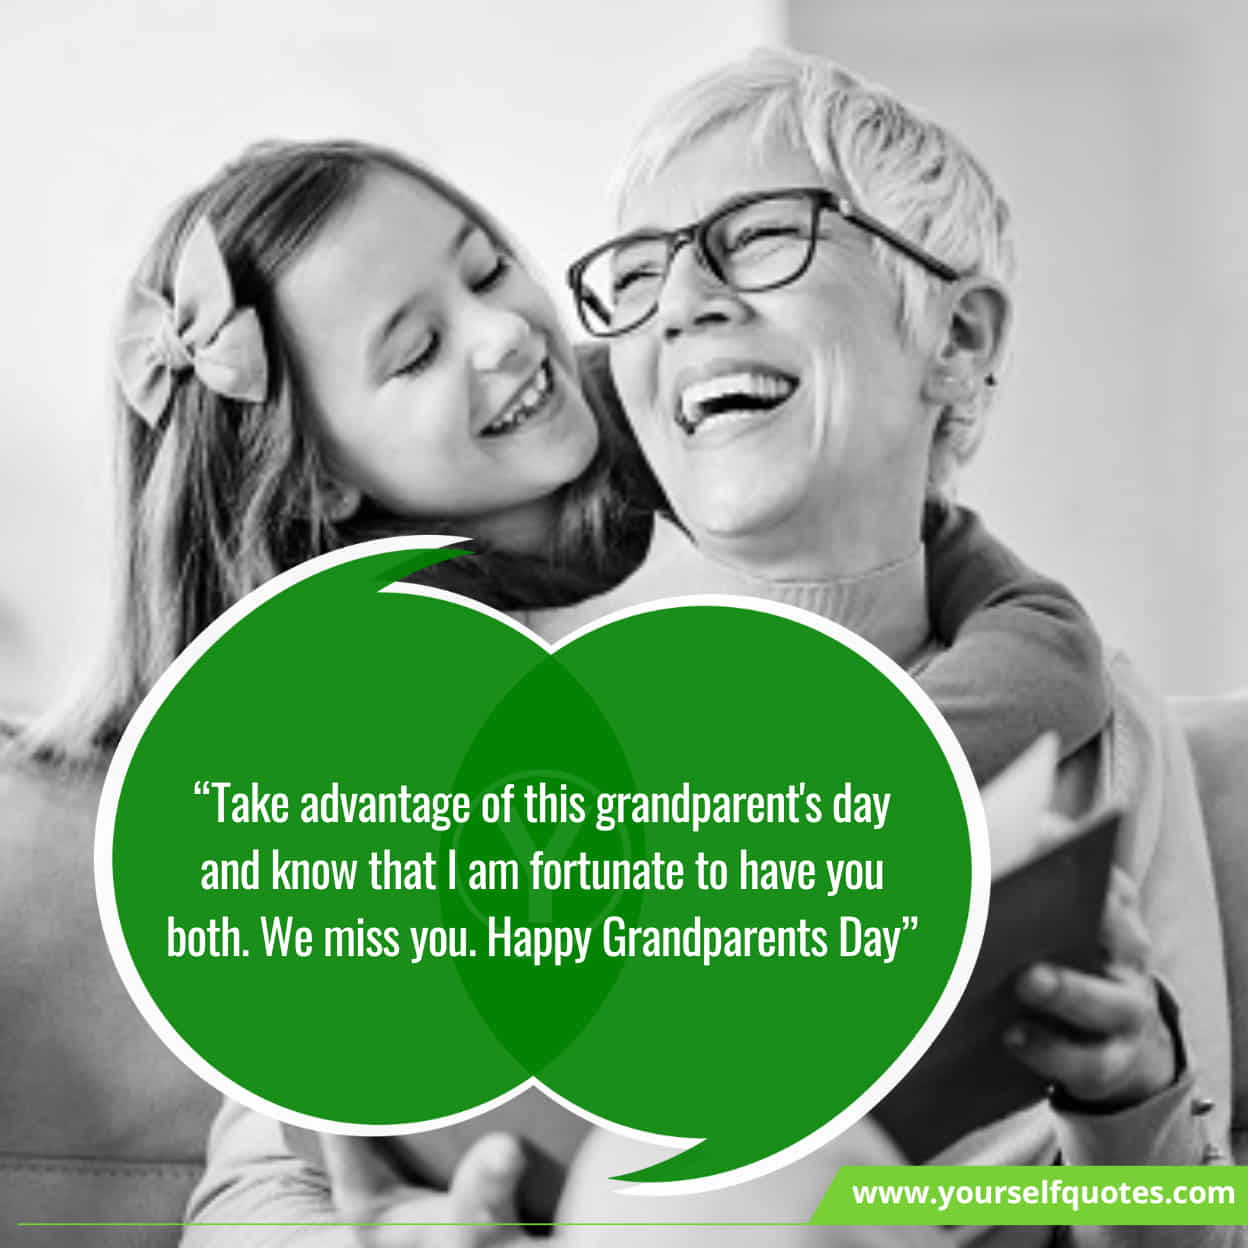 Grateful Messages For Happy Grandparents Day